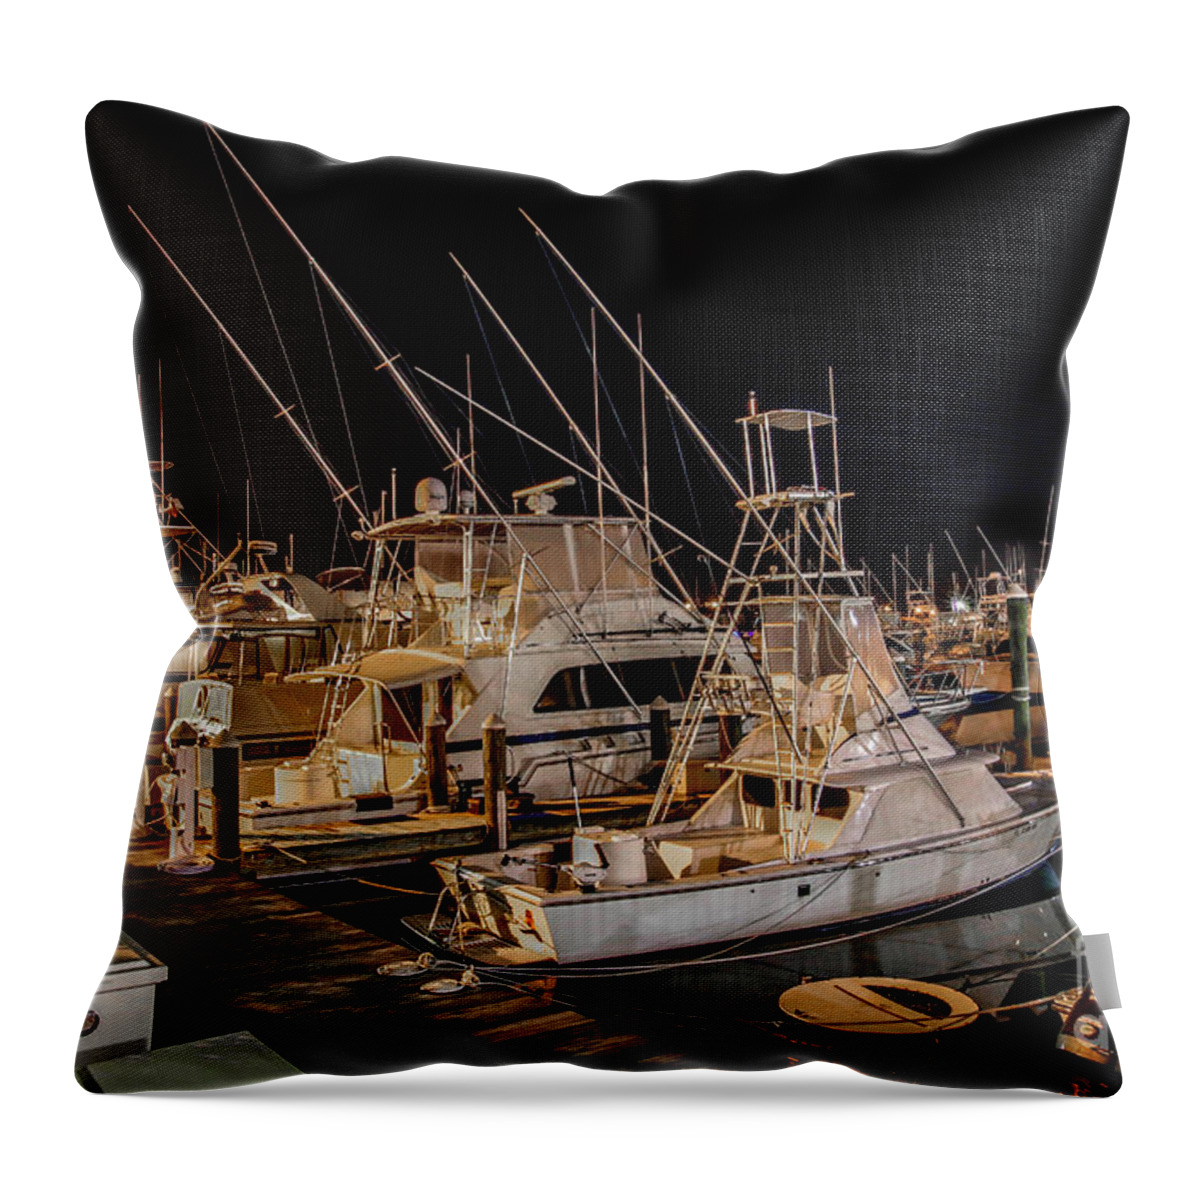 Boat. Boats Throw Pillow featuring the photograph Marina Fishing Boats by Tom Claud